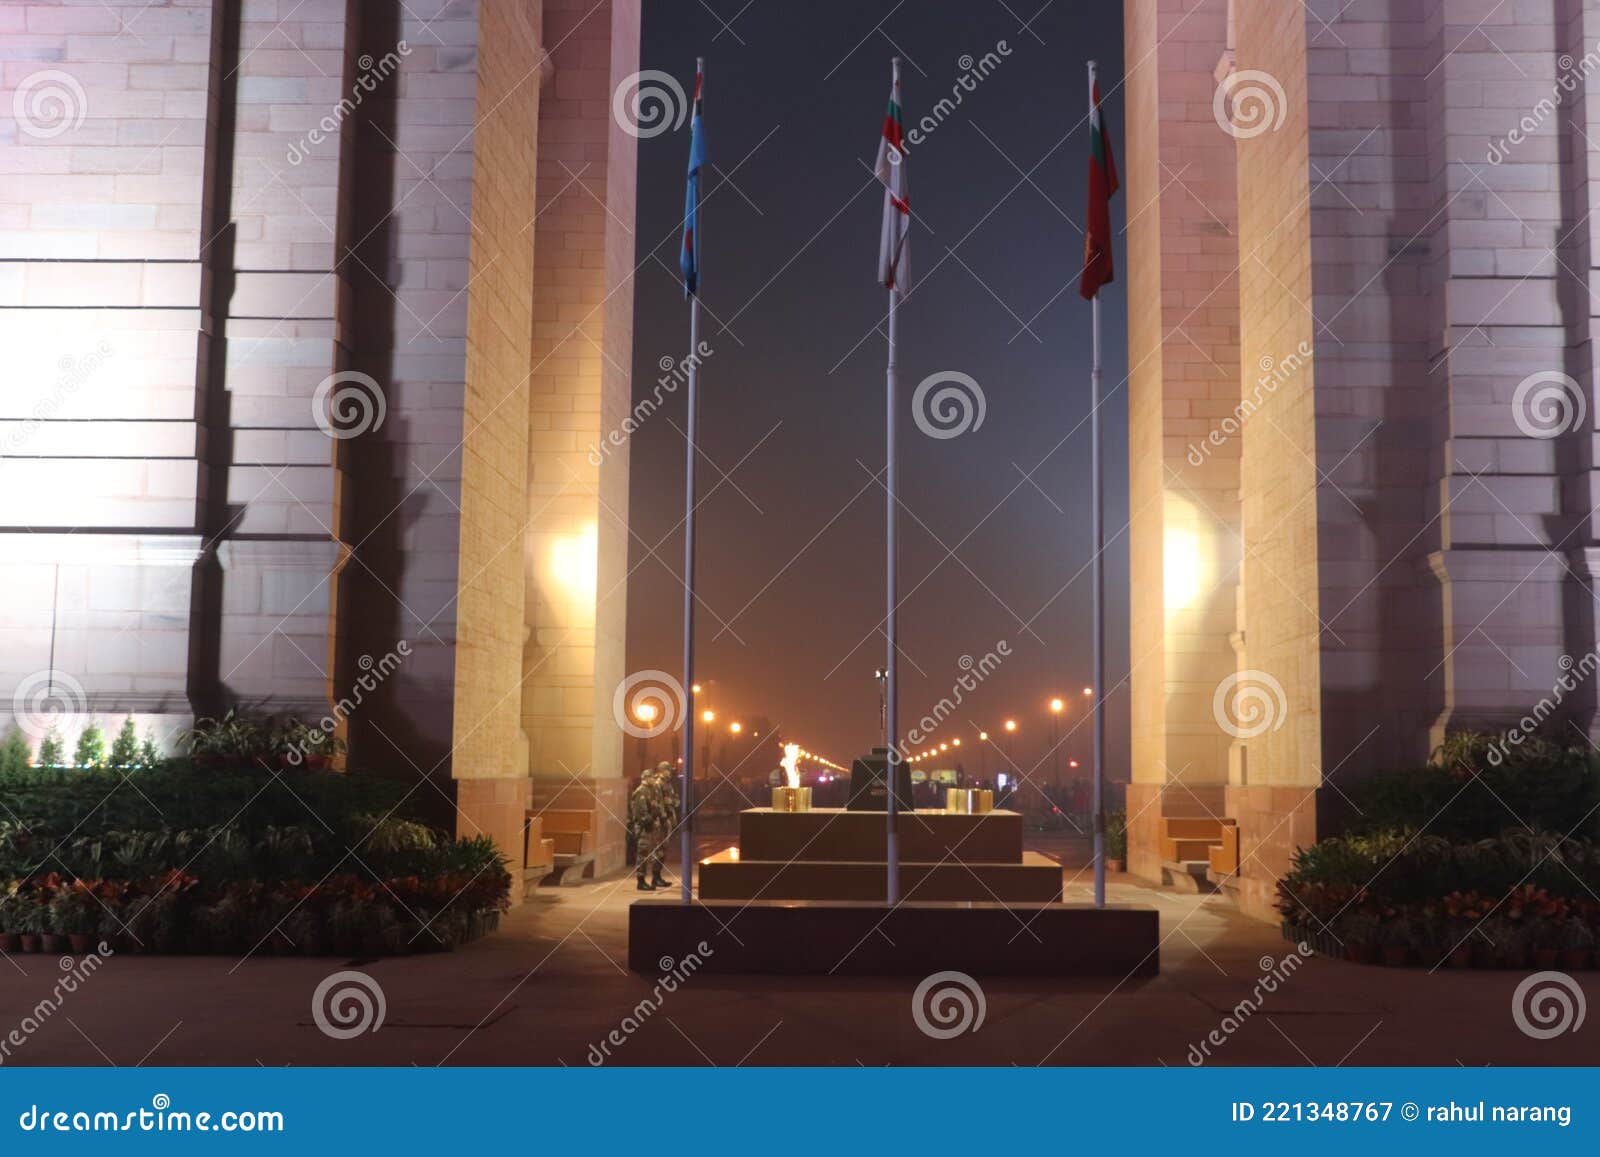 Amar Jawan Jyoti  Who built it Why was it made  Amar Jawan Jyoti  Who  built it Why was it made  India Today